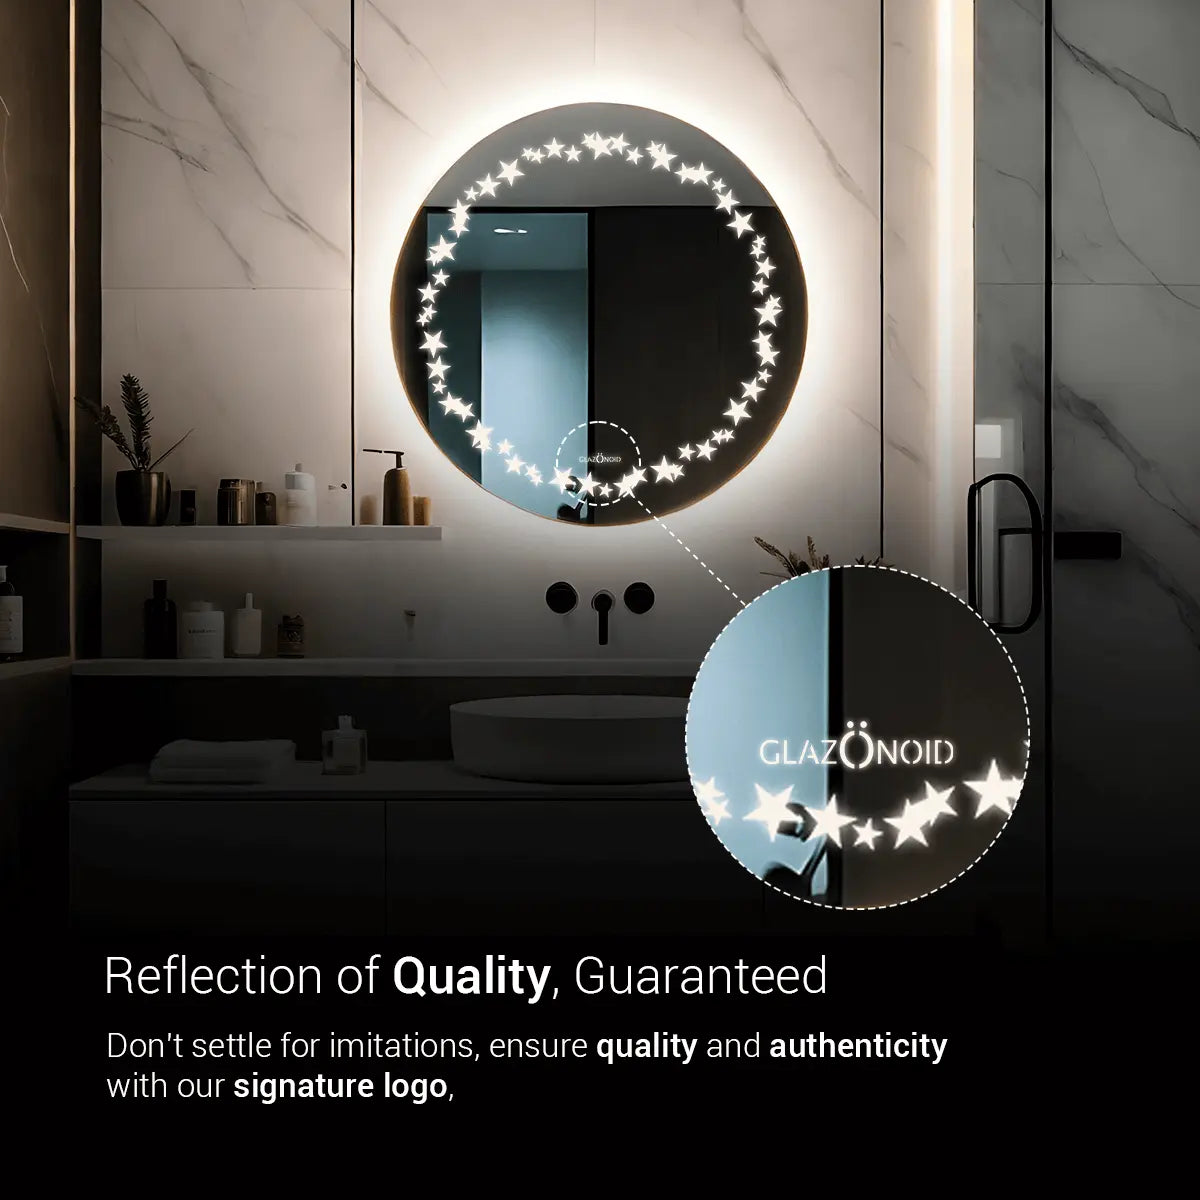 A round bathroom mirror, frameless featuring star shaped LED light. The mirror is mounted on a bathroom wall above a sink. Text overlaid on the image reads ‘Glazonoid, Reflection of Quality, Guaranteed’